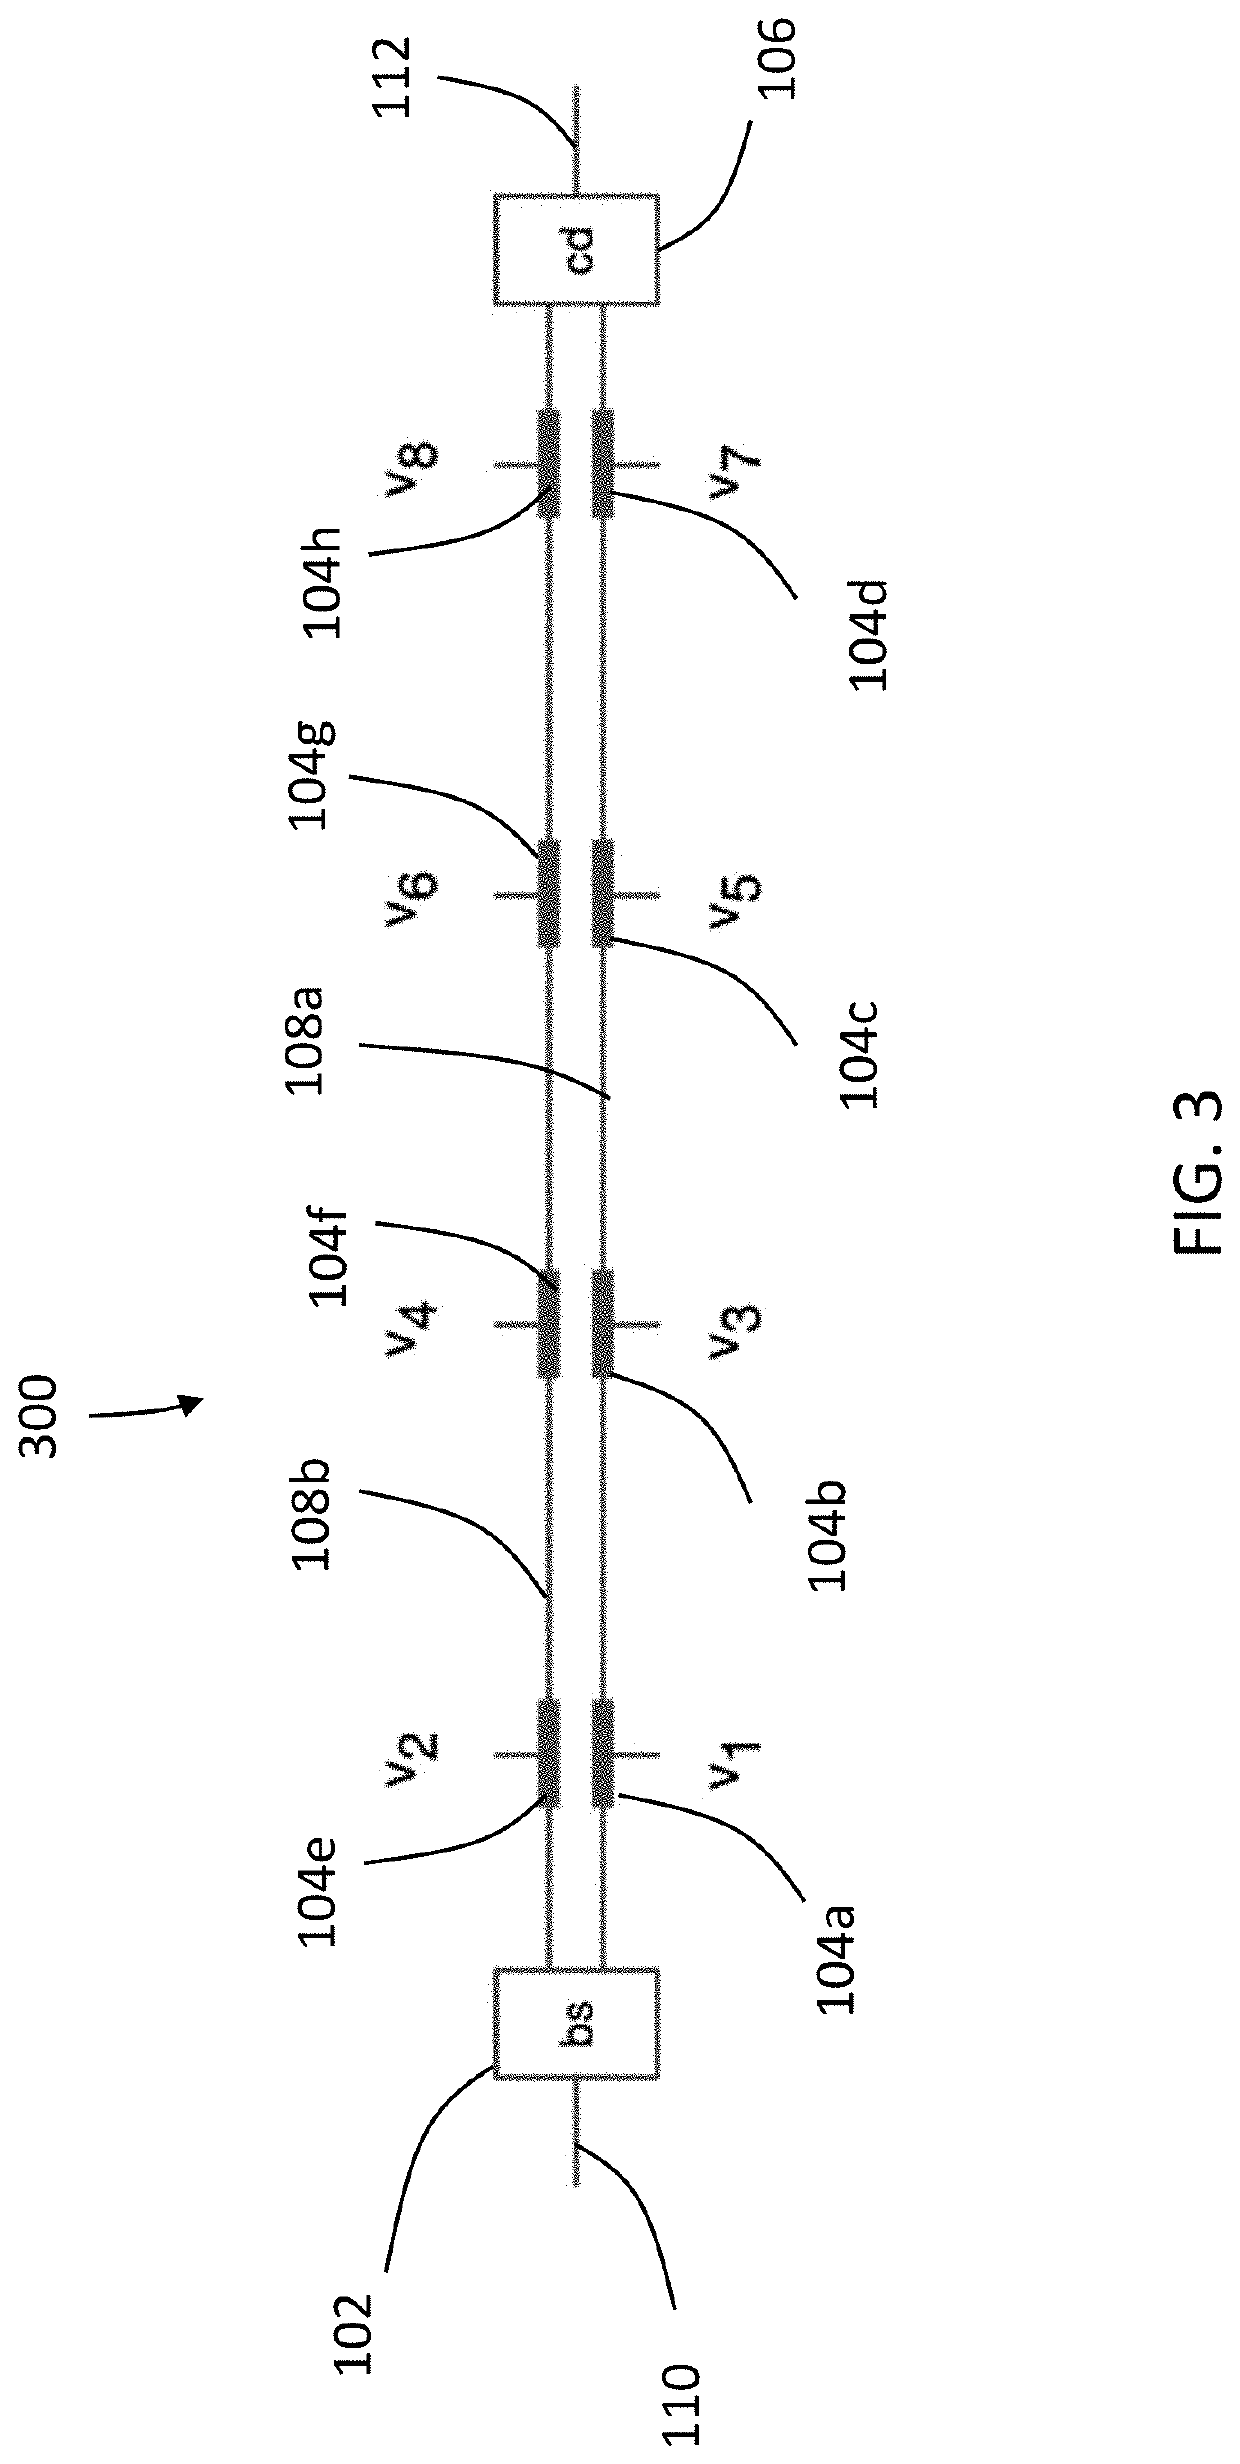 Residue number system in a photonic matrix accelerator